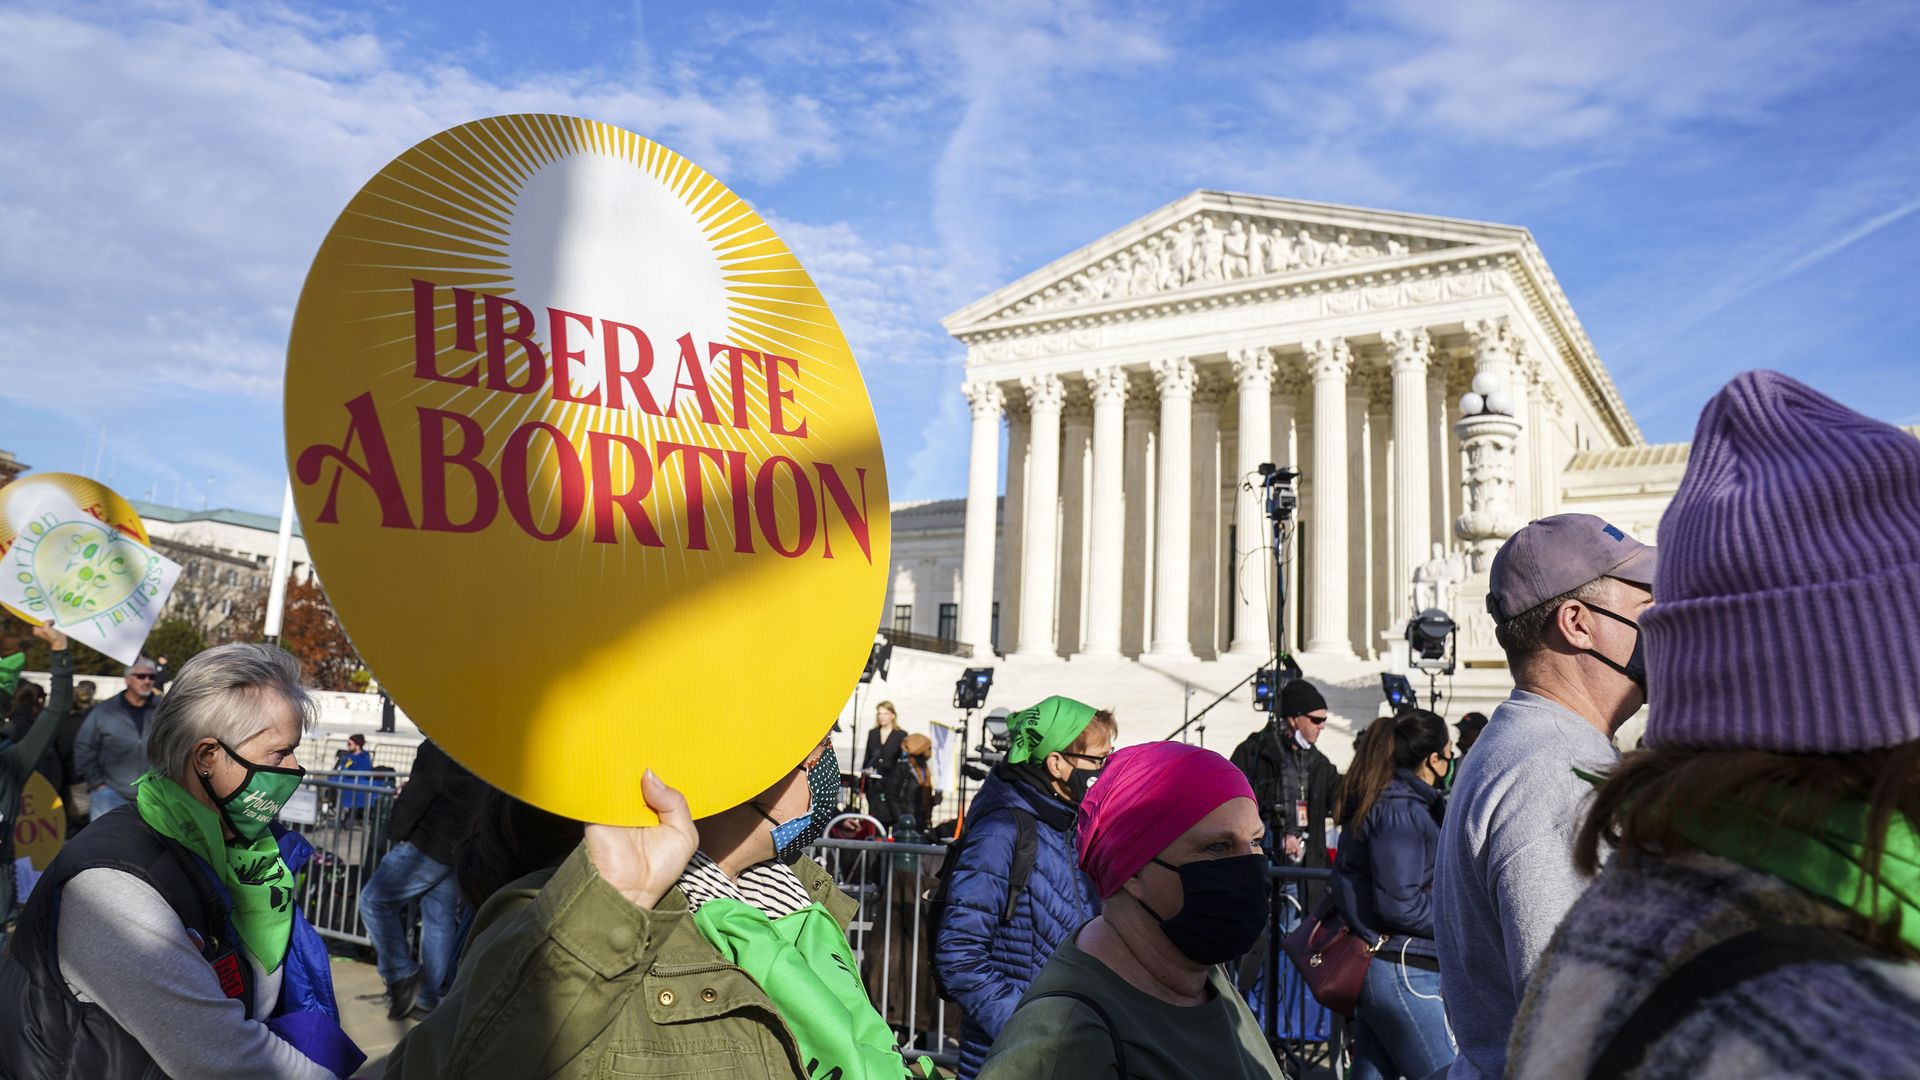 Picture of pro-choice advocates marching in front of the Supreme Court, one is holding a sign that says "liberate abortion"